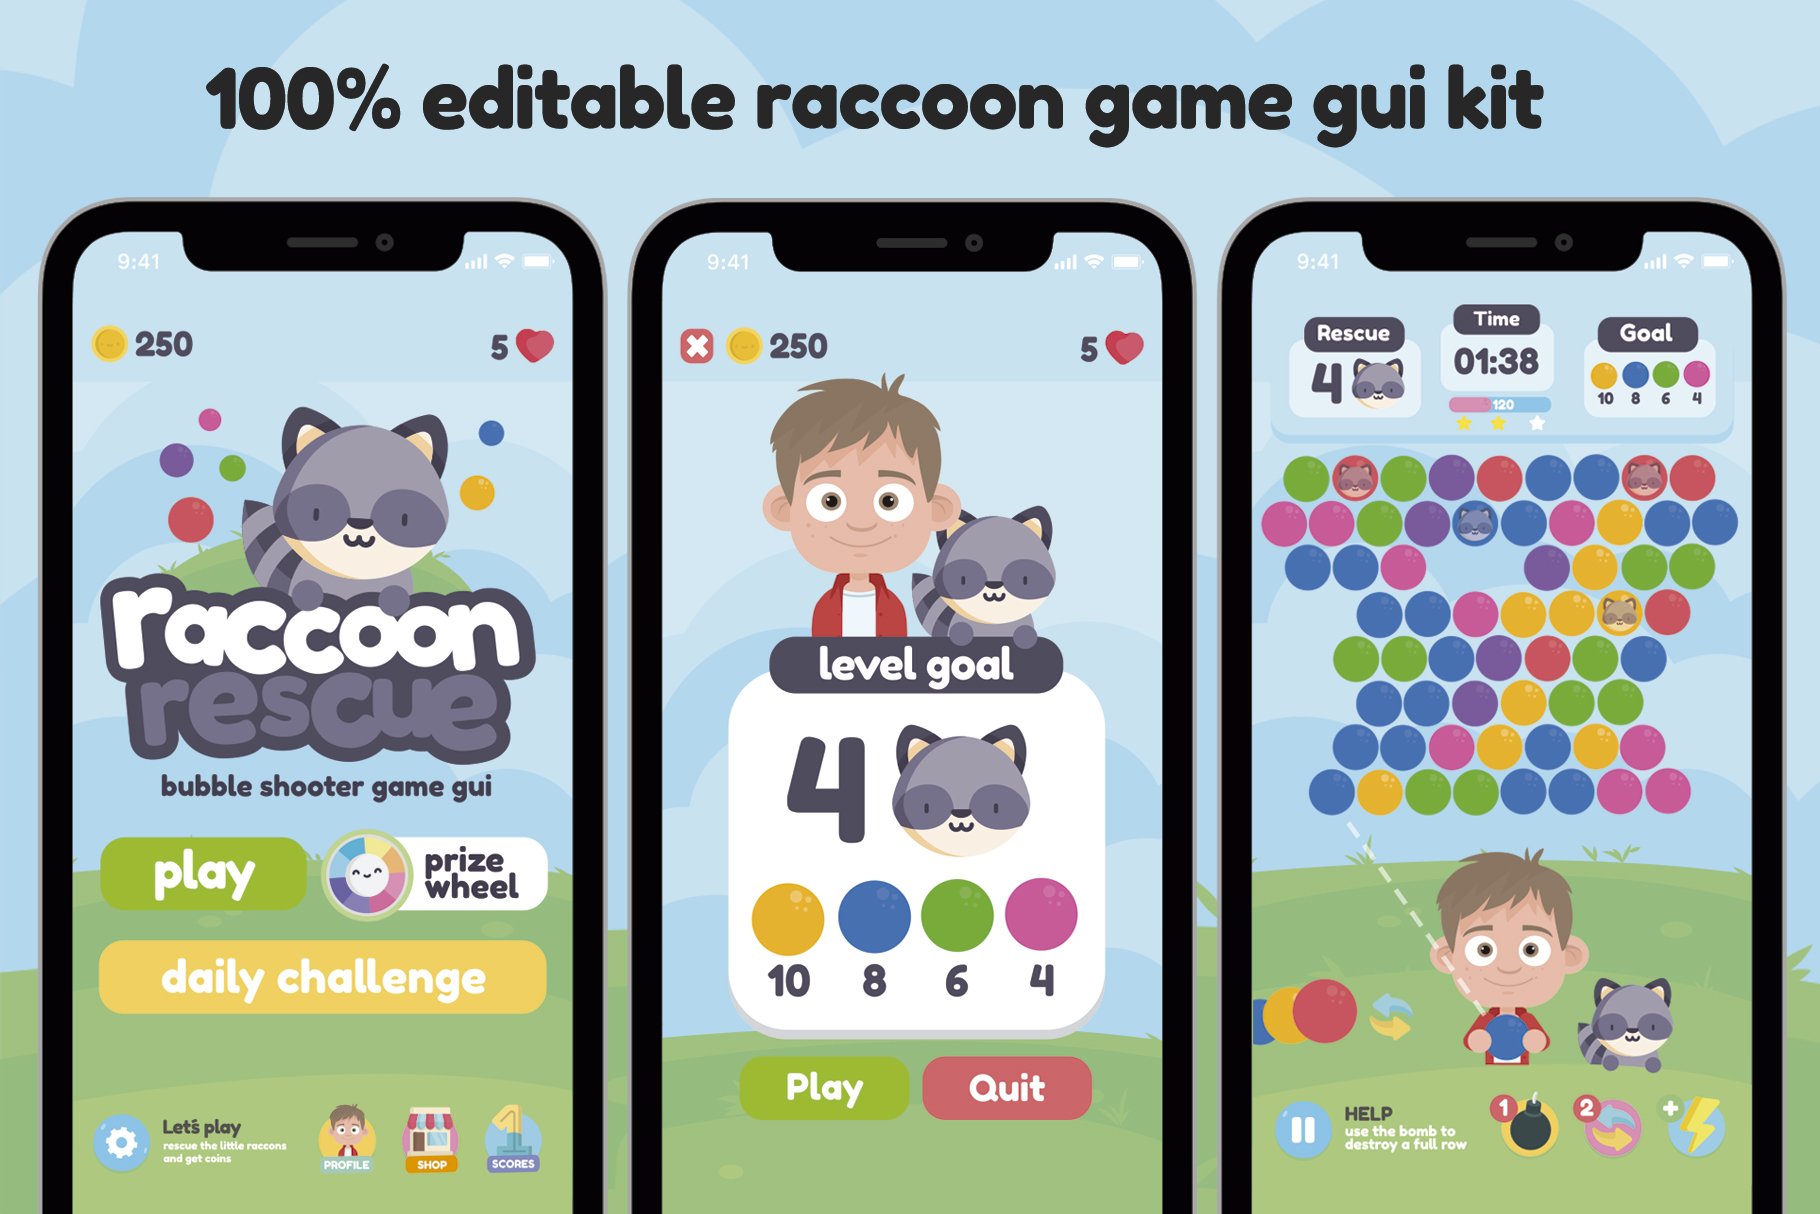 Racoon Rescue Game Gui Assets preview image.